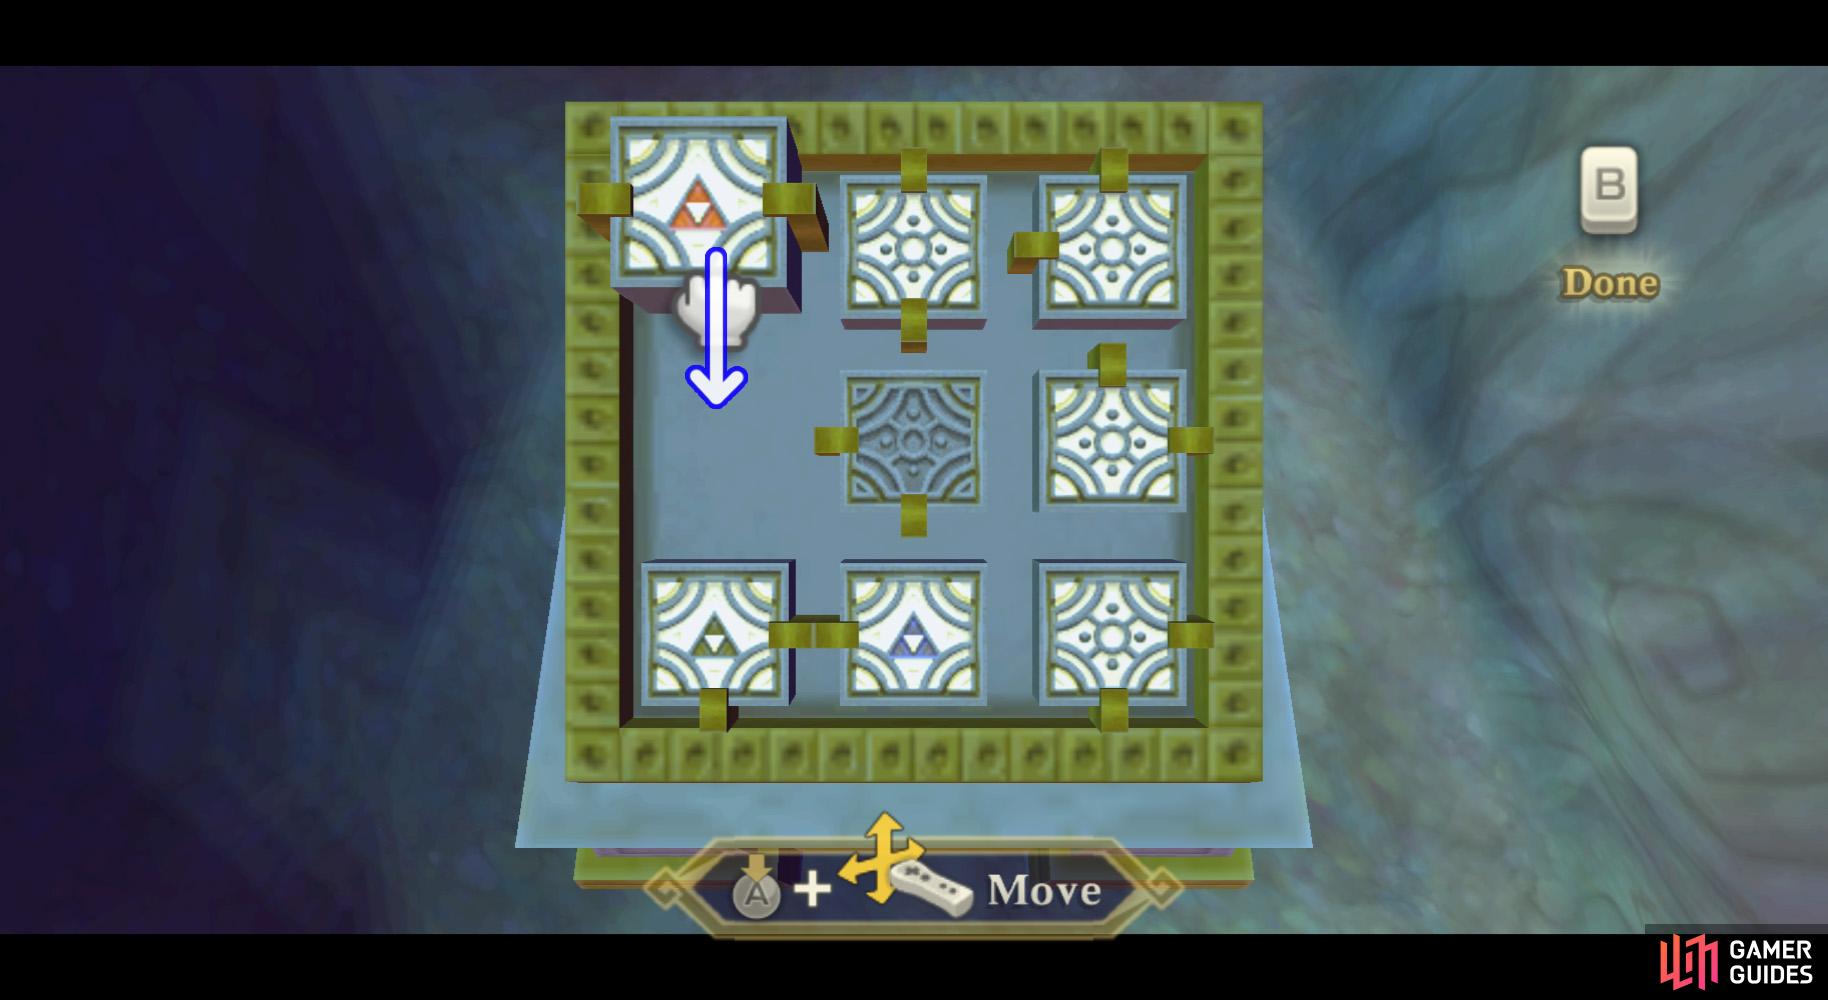 Afterwards, move the room with the red Triforce down so it's to the left of the center.